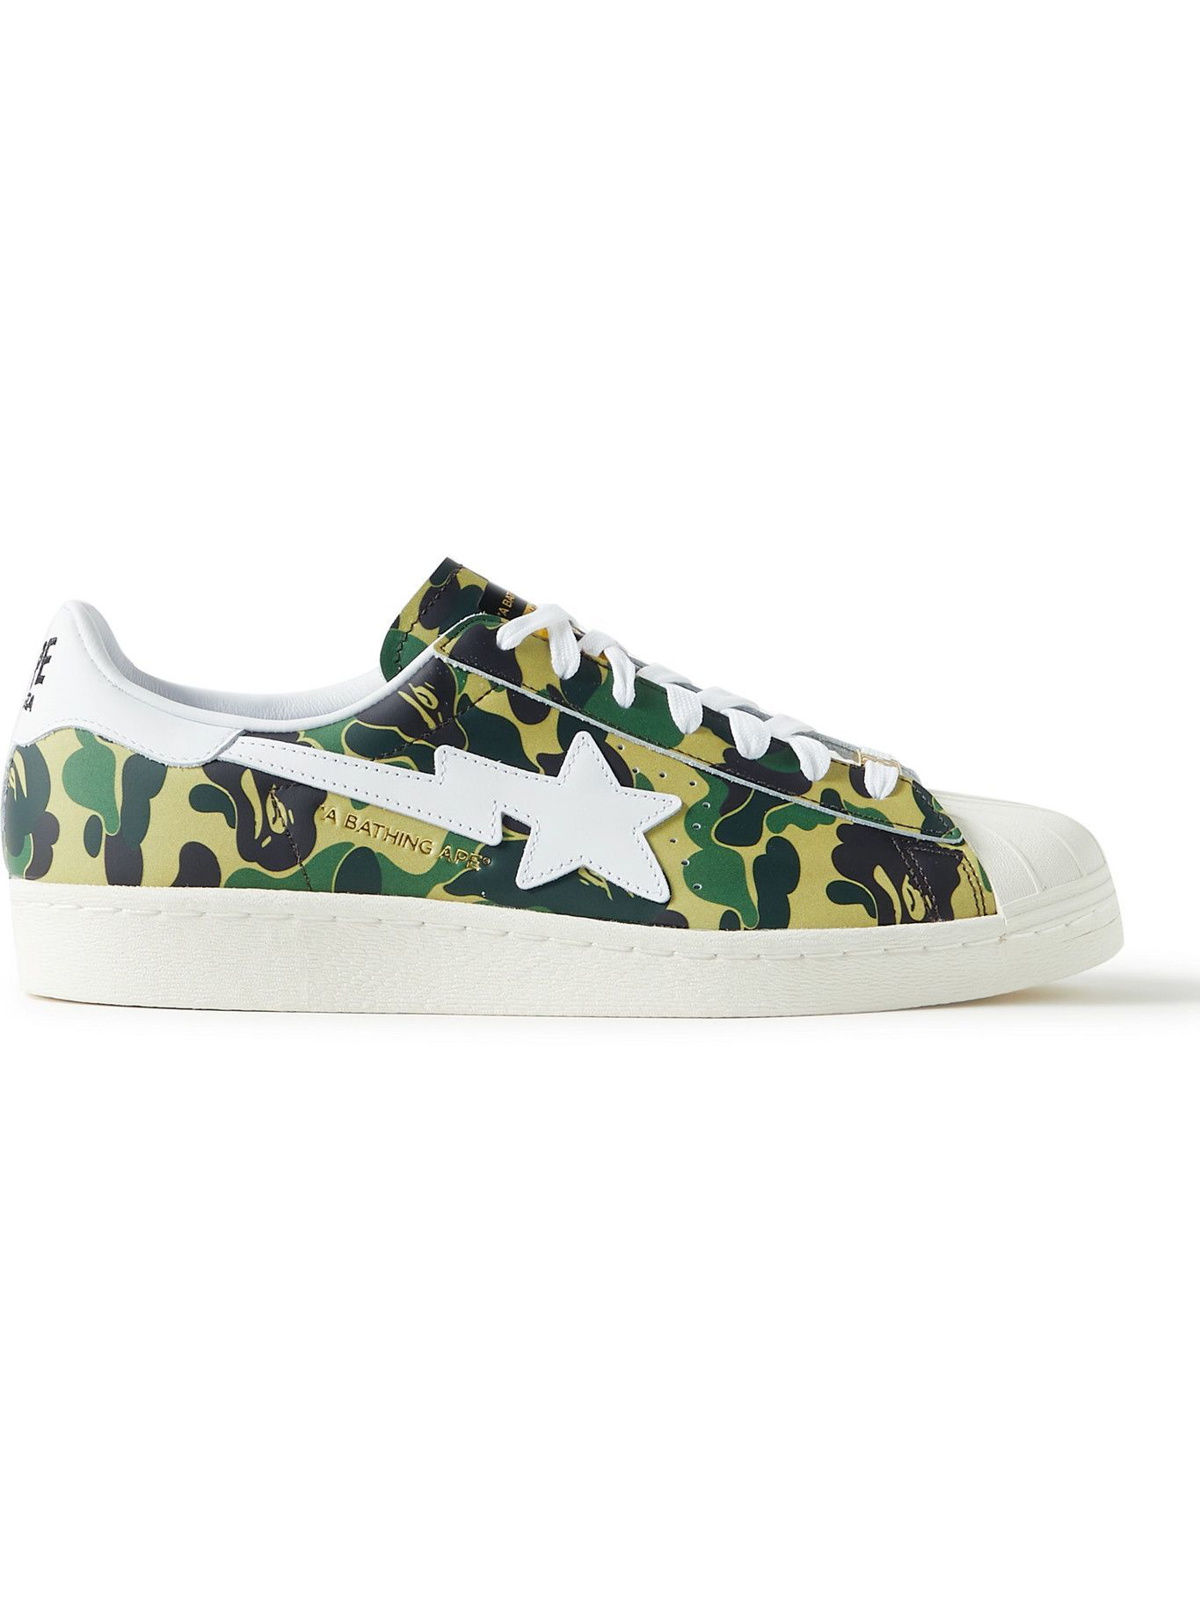 Military-Inspired Motifs Get Deployed On The adidas Superstar Camo -  Sneaker News